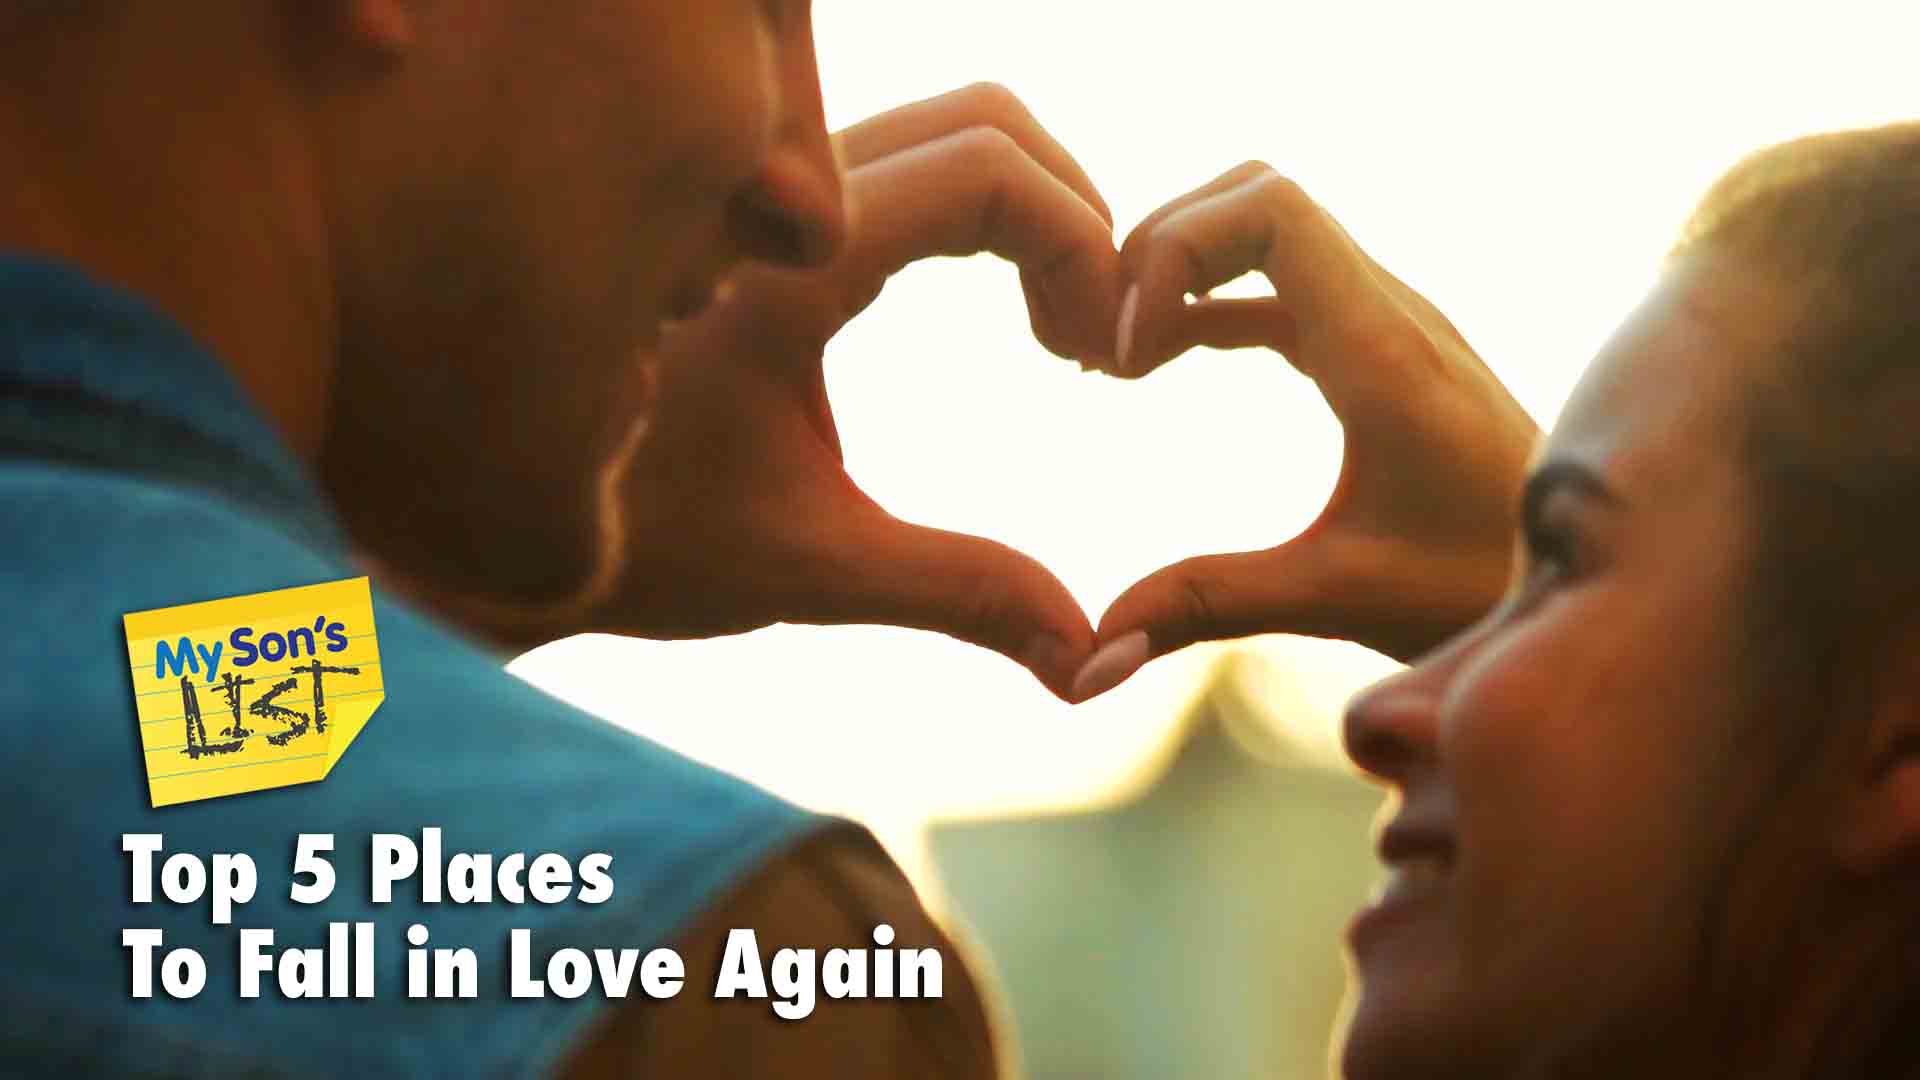 Top 5 Places to Fall in Love Again